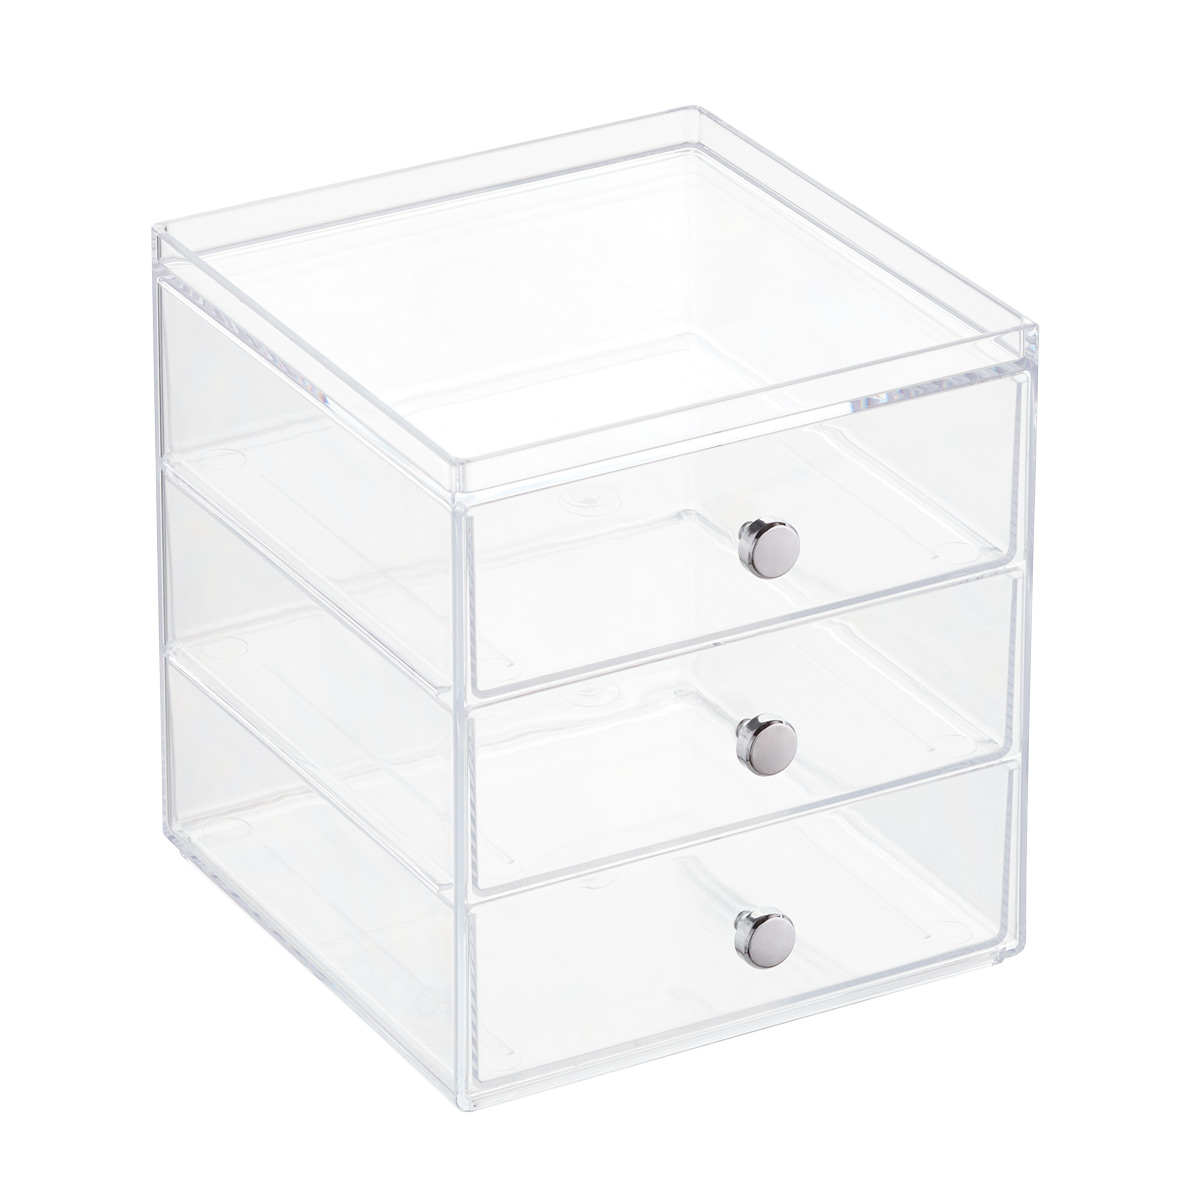 iDESIGN Clarity 3-Drawer Stacking Box Clear